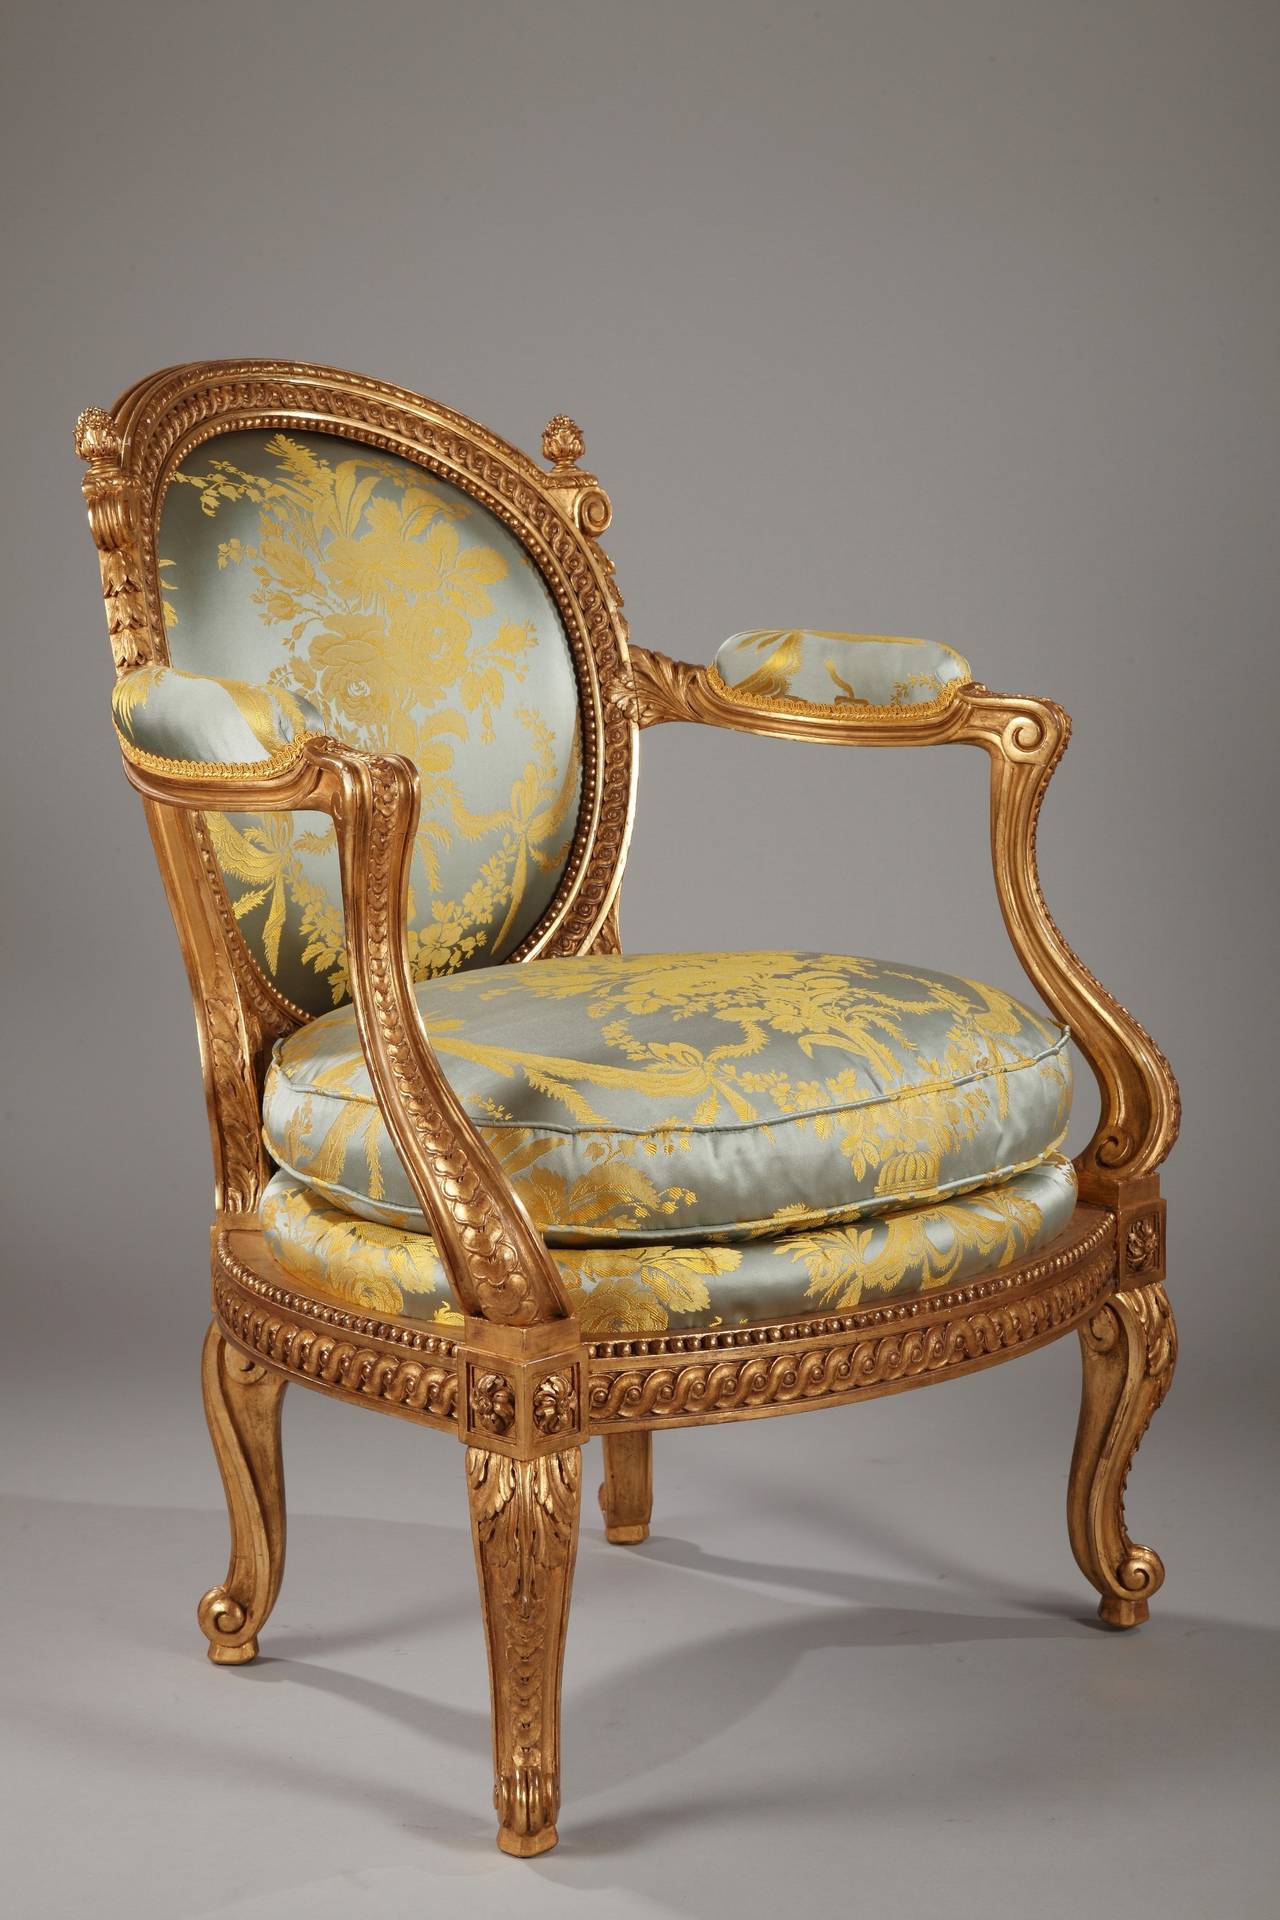 Rare sculpted and gilded wood armchair with a medallion back. Richly adorned with friezes of interlacings, beads and piastres, completed with rosettes and acanthus leaves. Standing on console feet. 
Its reduced dimensions allow affirming that this